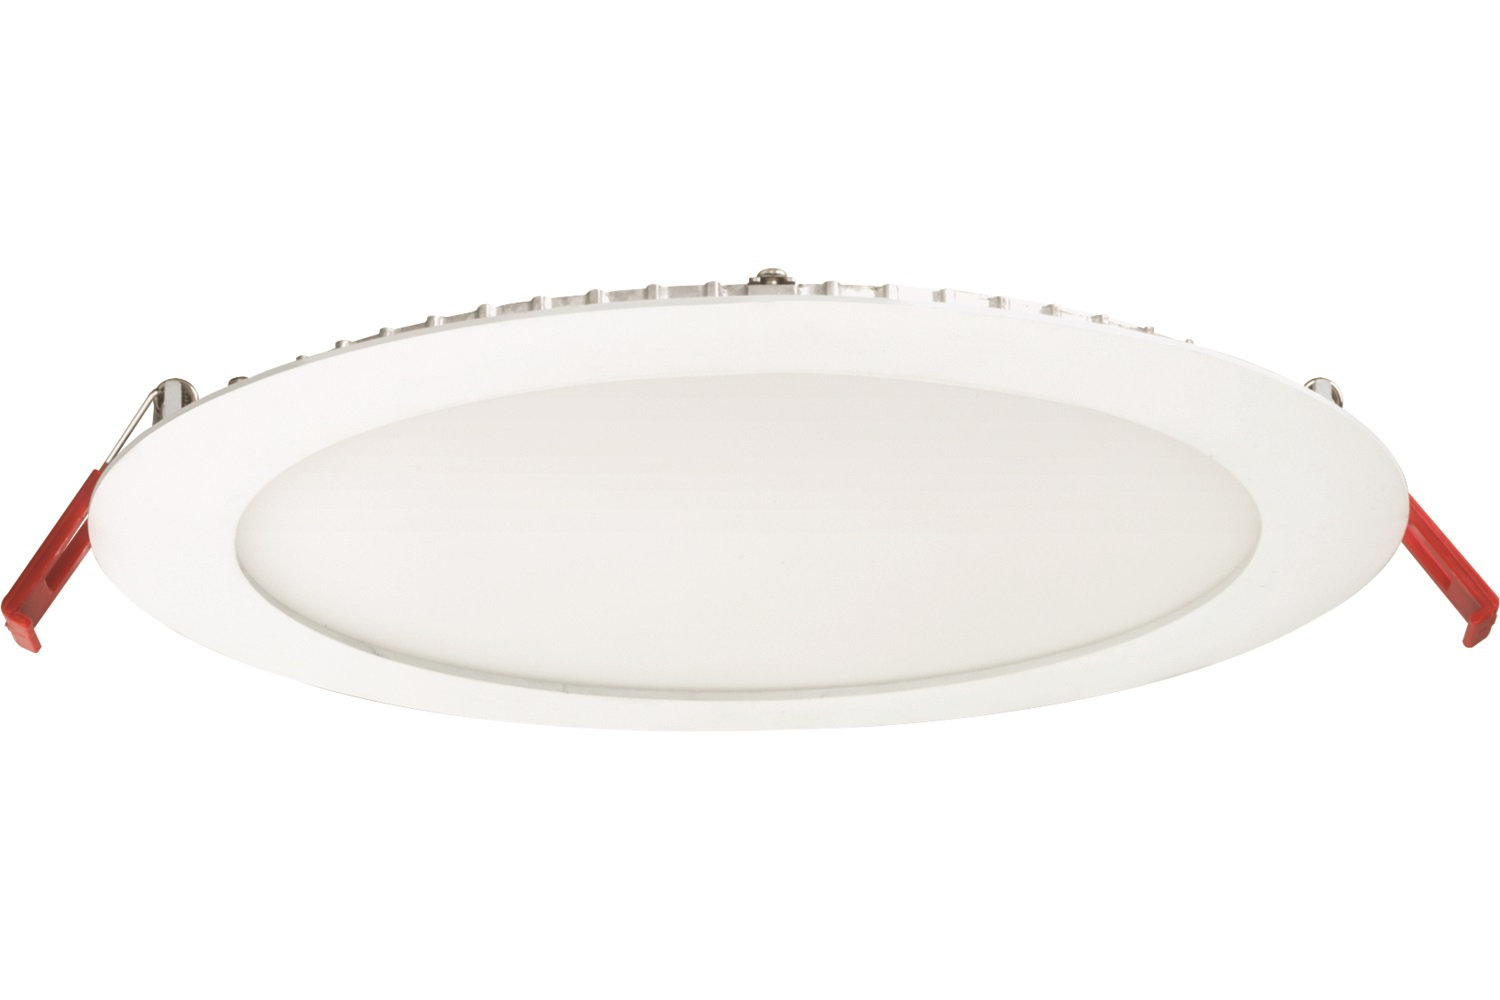 Lithonia Lighting Wafer 4'' Dimmable Air-Tight LED Canless Recessed Lighting  Kit  Reviews Wayfair